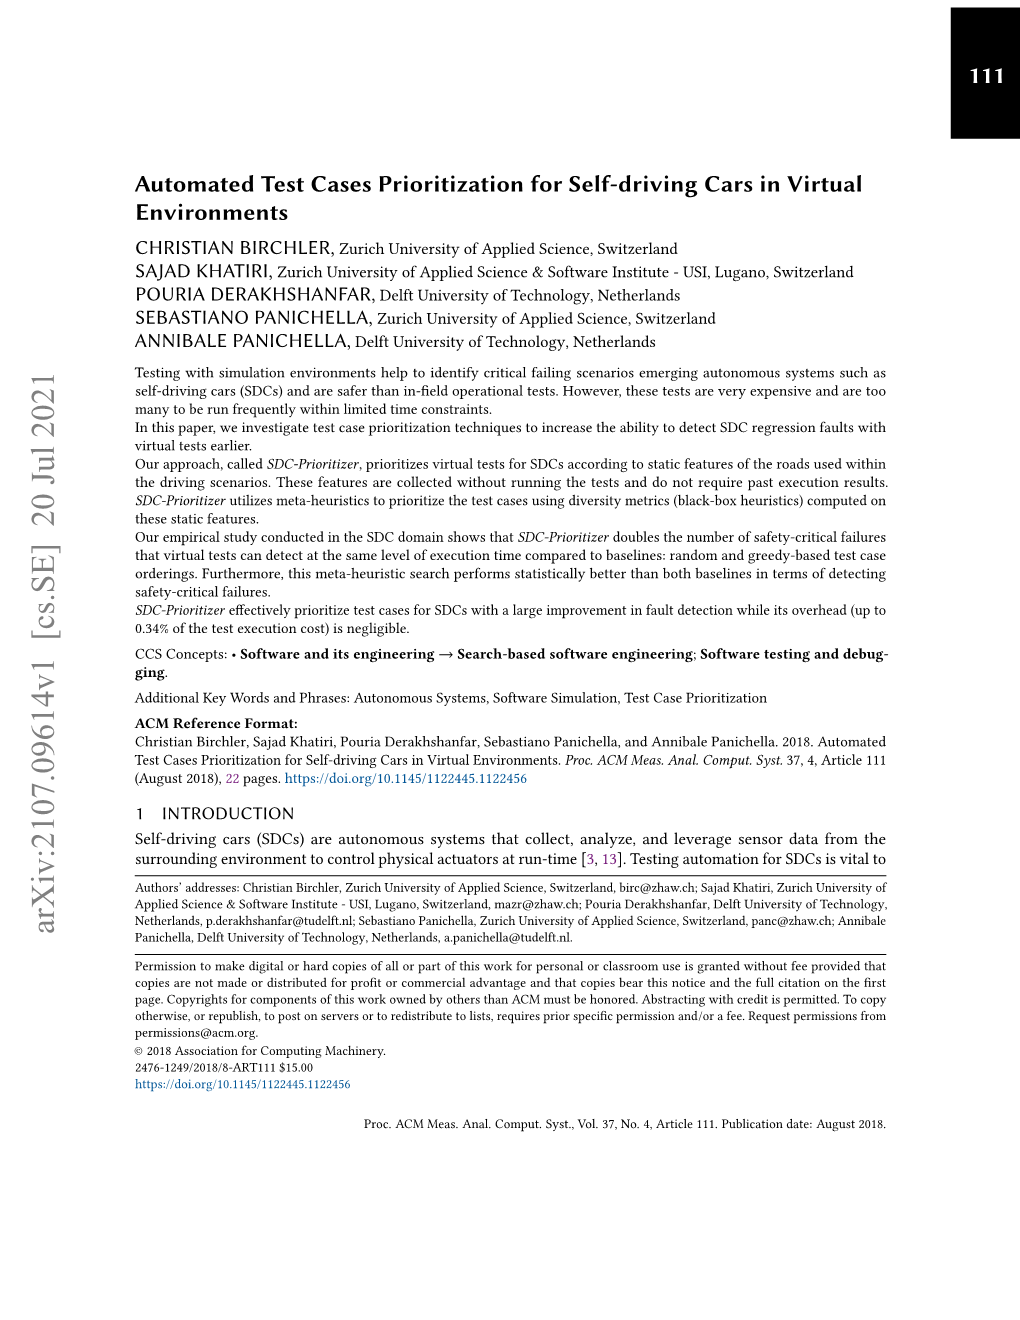 Automated Test Cases Prioritization for Self-Driving Cars in Virtual